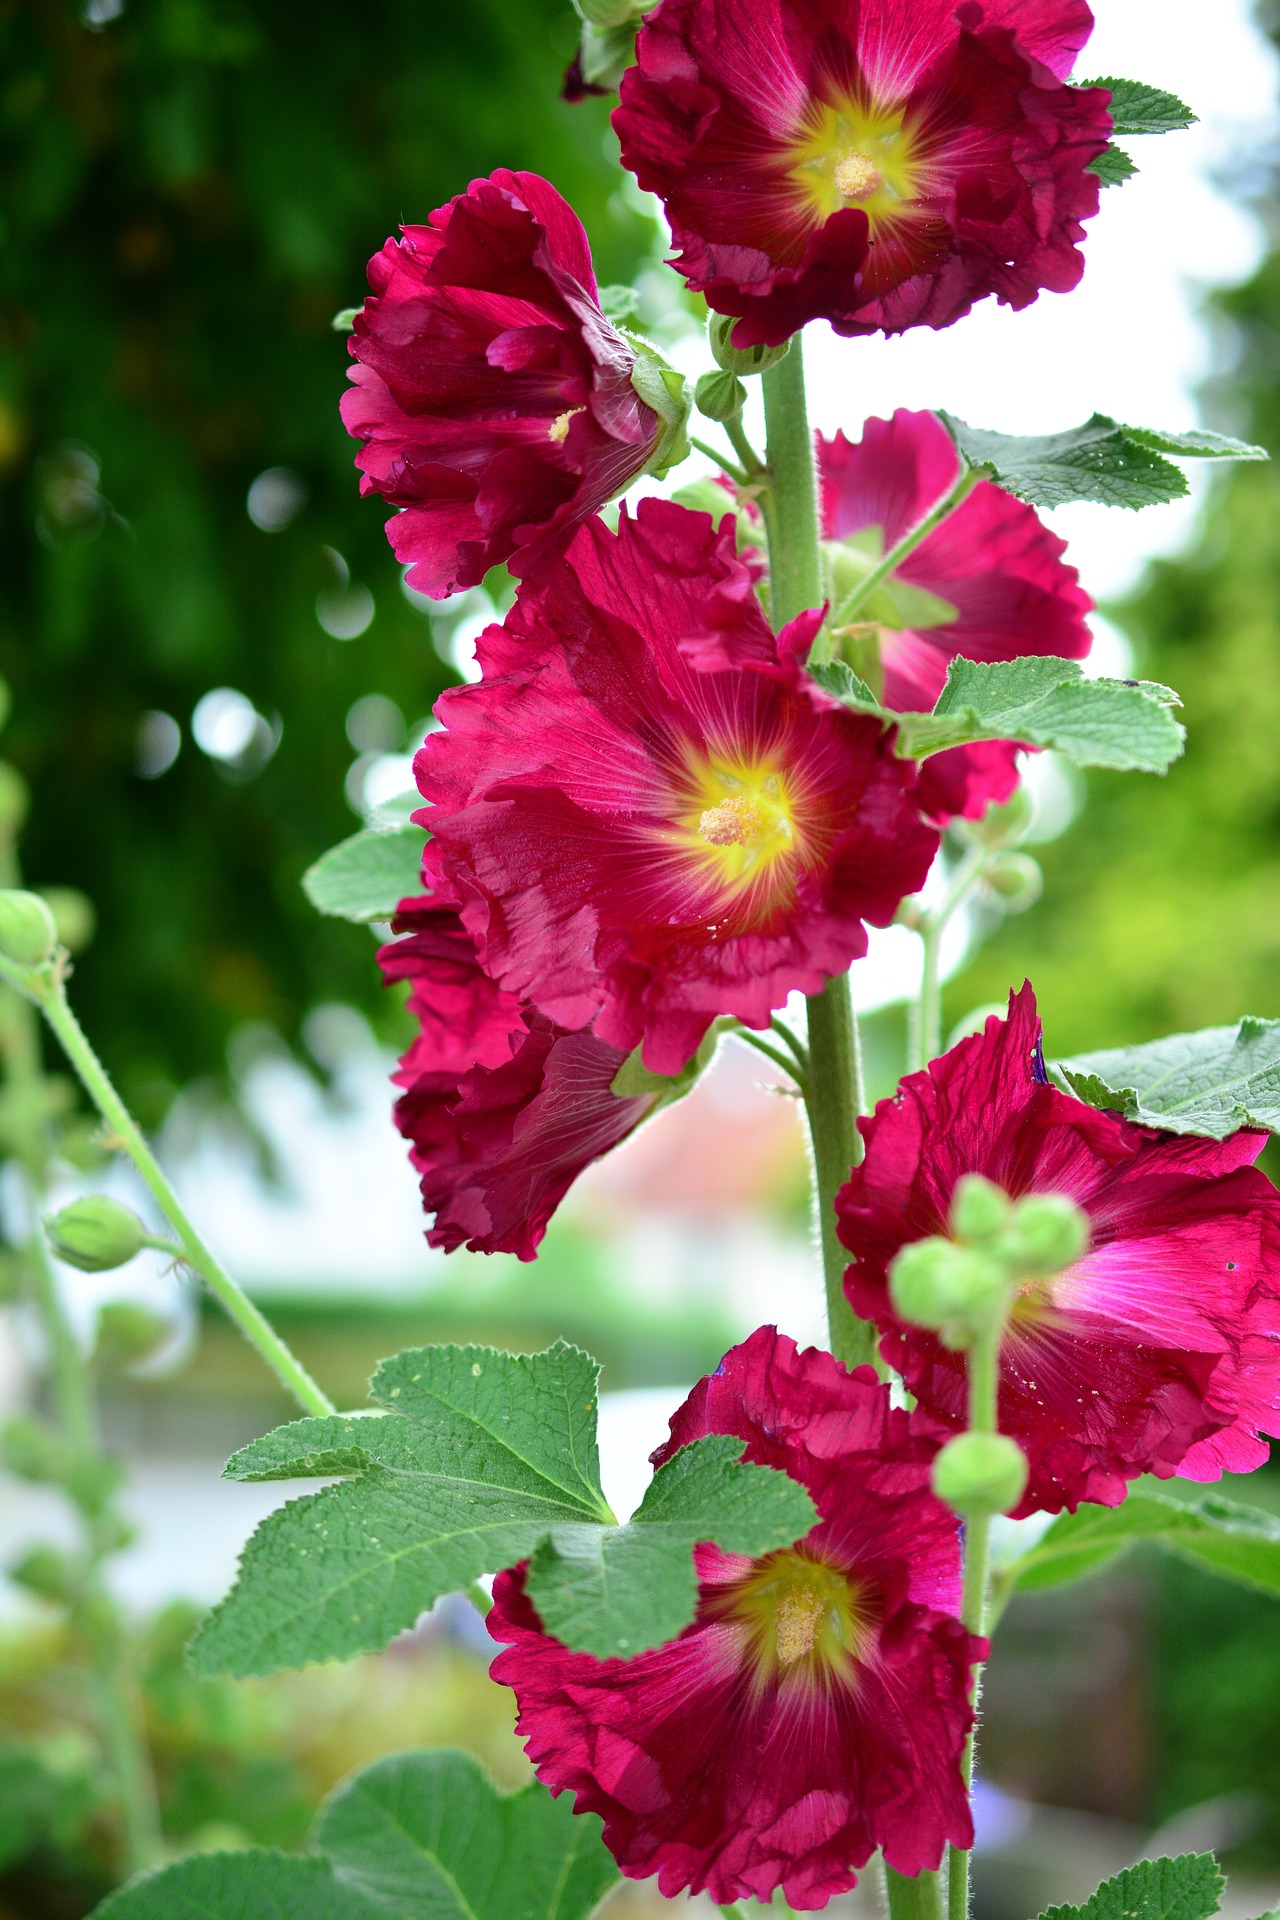 Are Hollyhocks Poisonous? Can I touch Them?